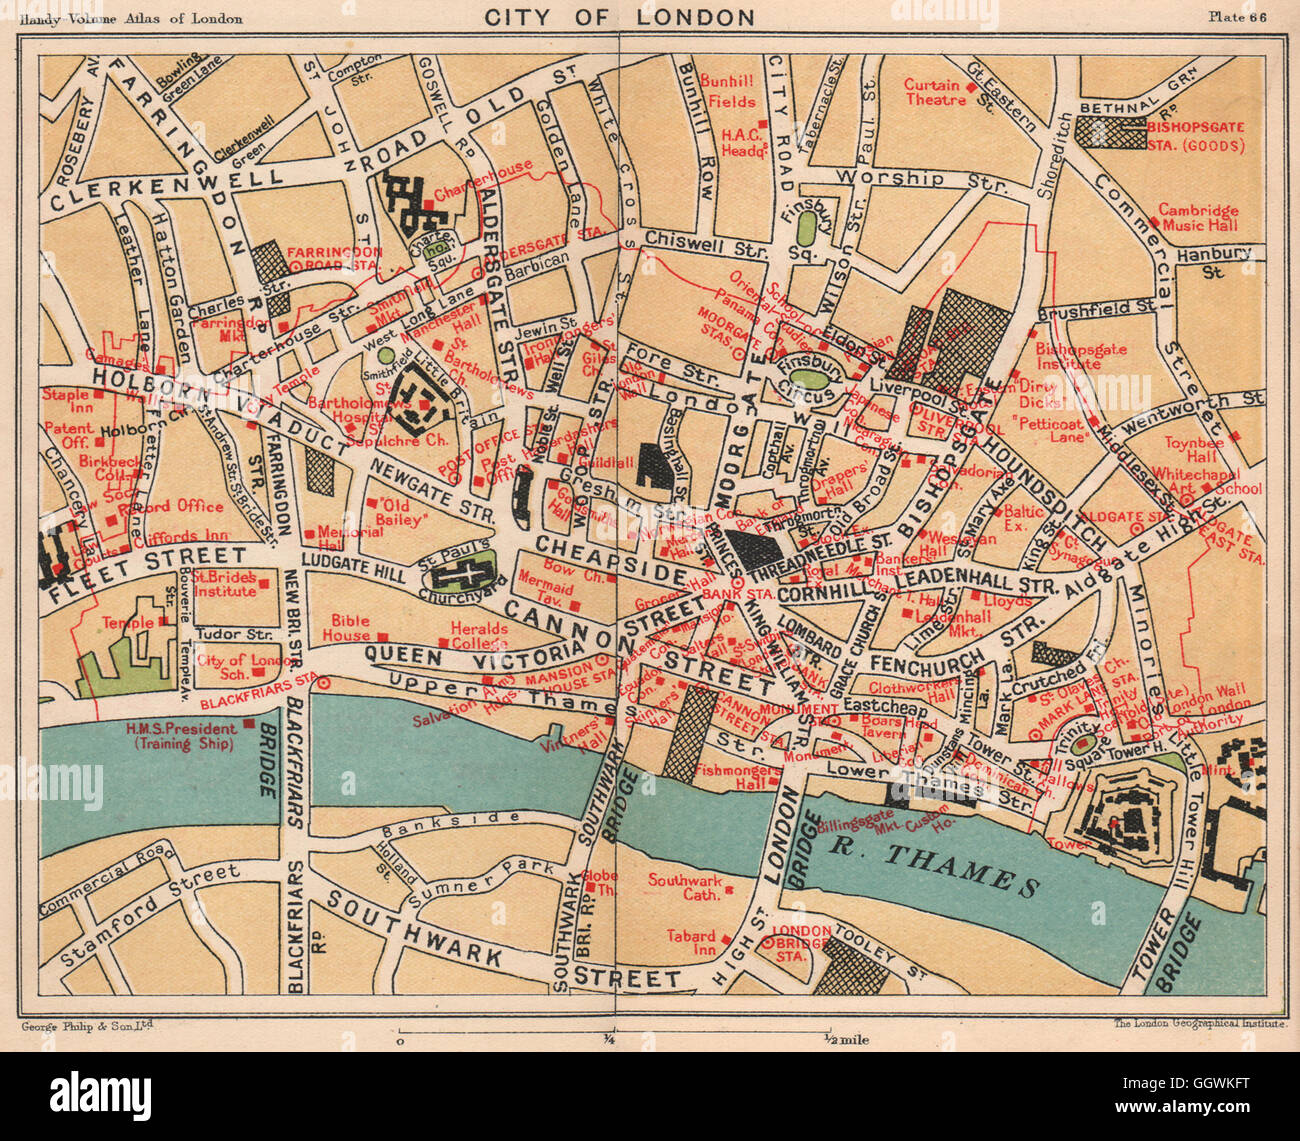 CITY OF LONDON. Public buildings Livery companies Exchanges Embassies, 1932 map Stock Photo